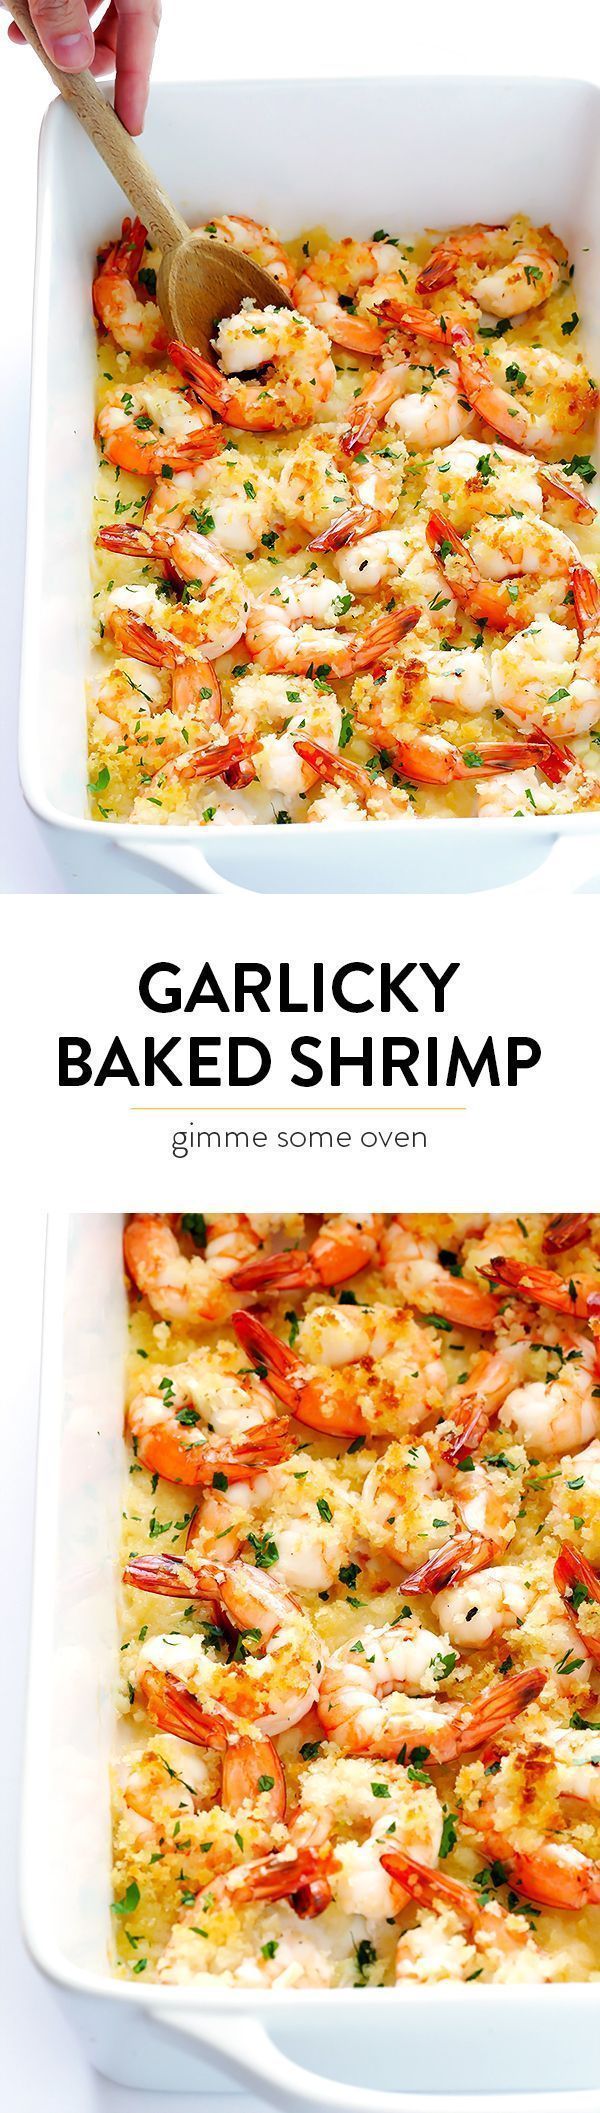 Garlicky Baked Shrimp Recipe — one of my favorite easy dinners!  It’s super quick, calls for just a few simple ingredients, and